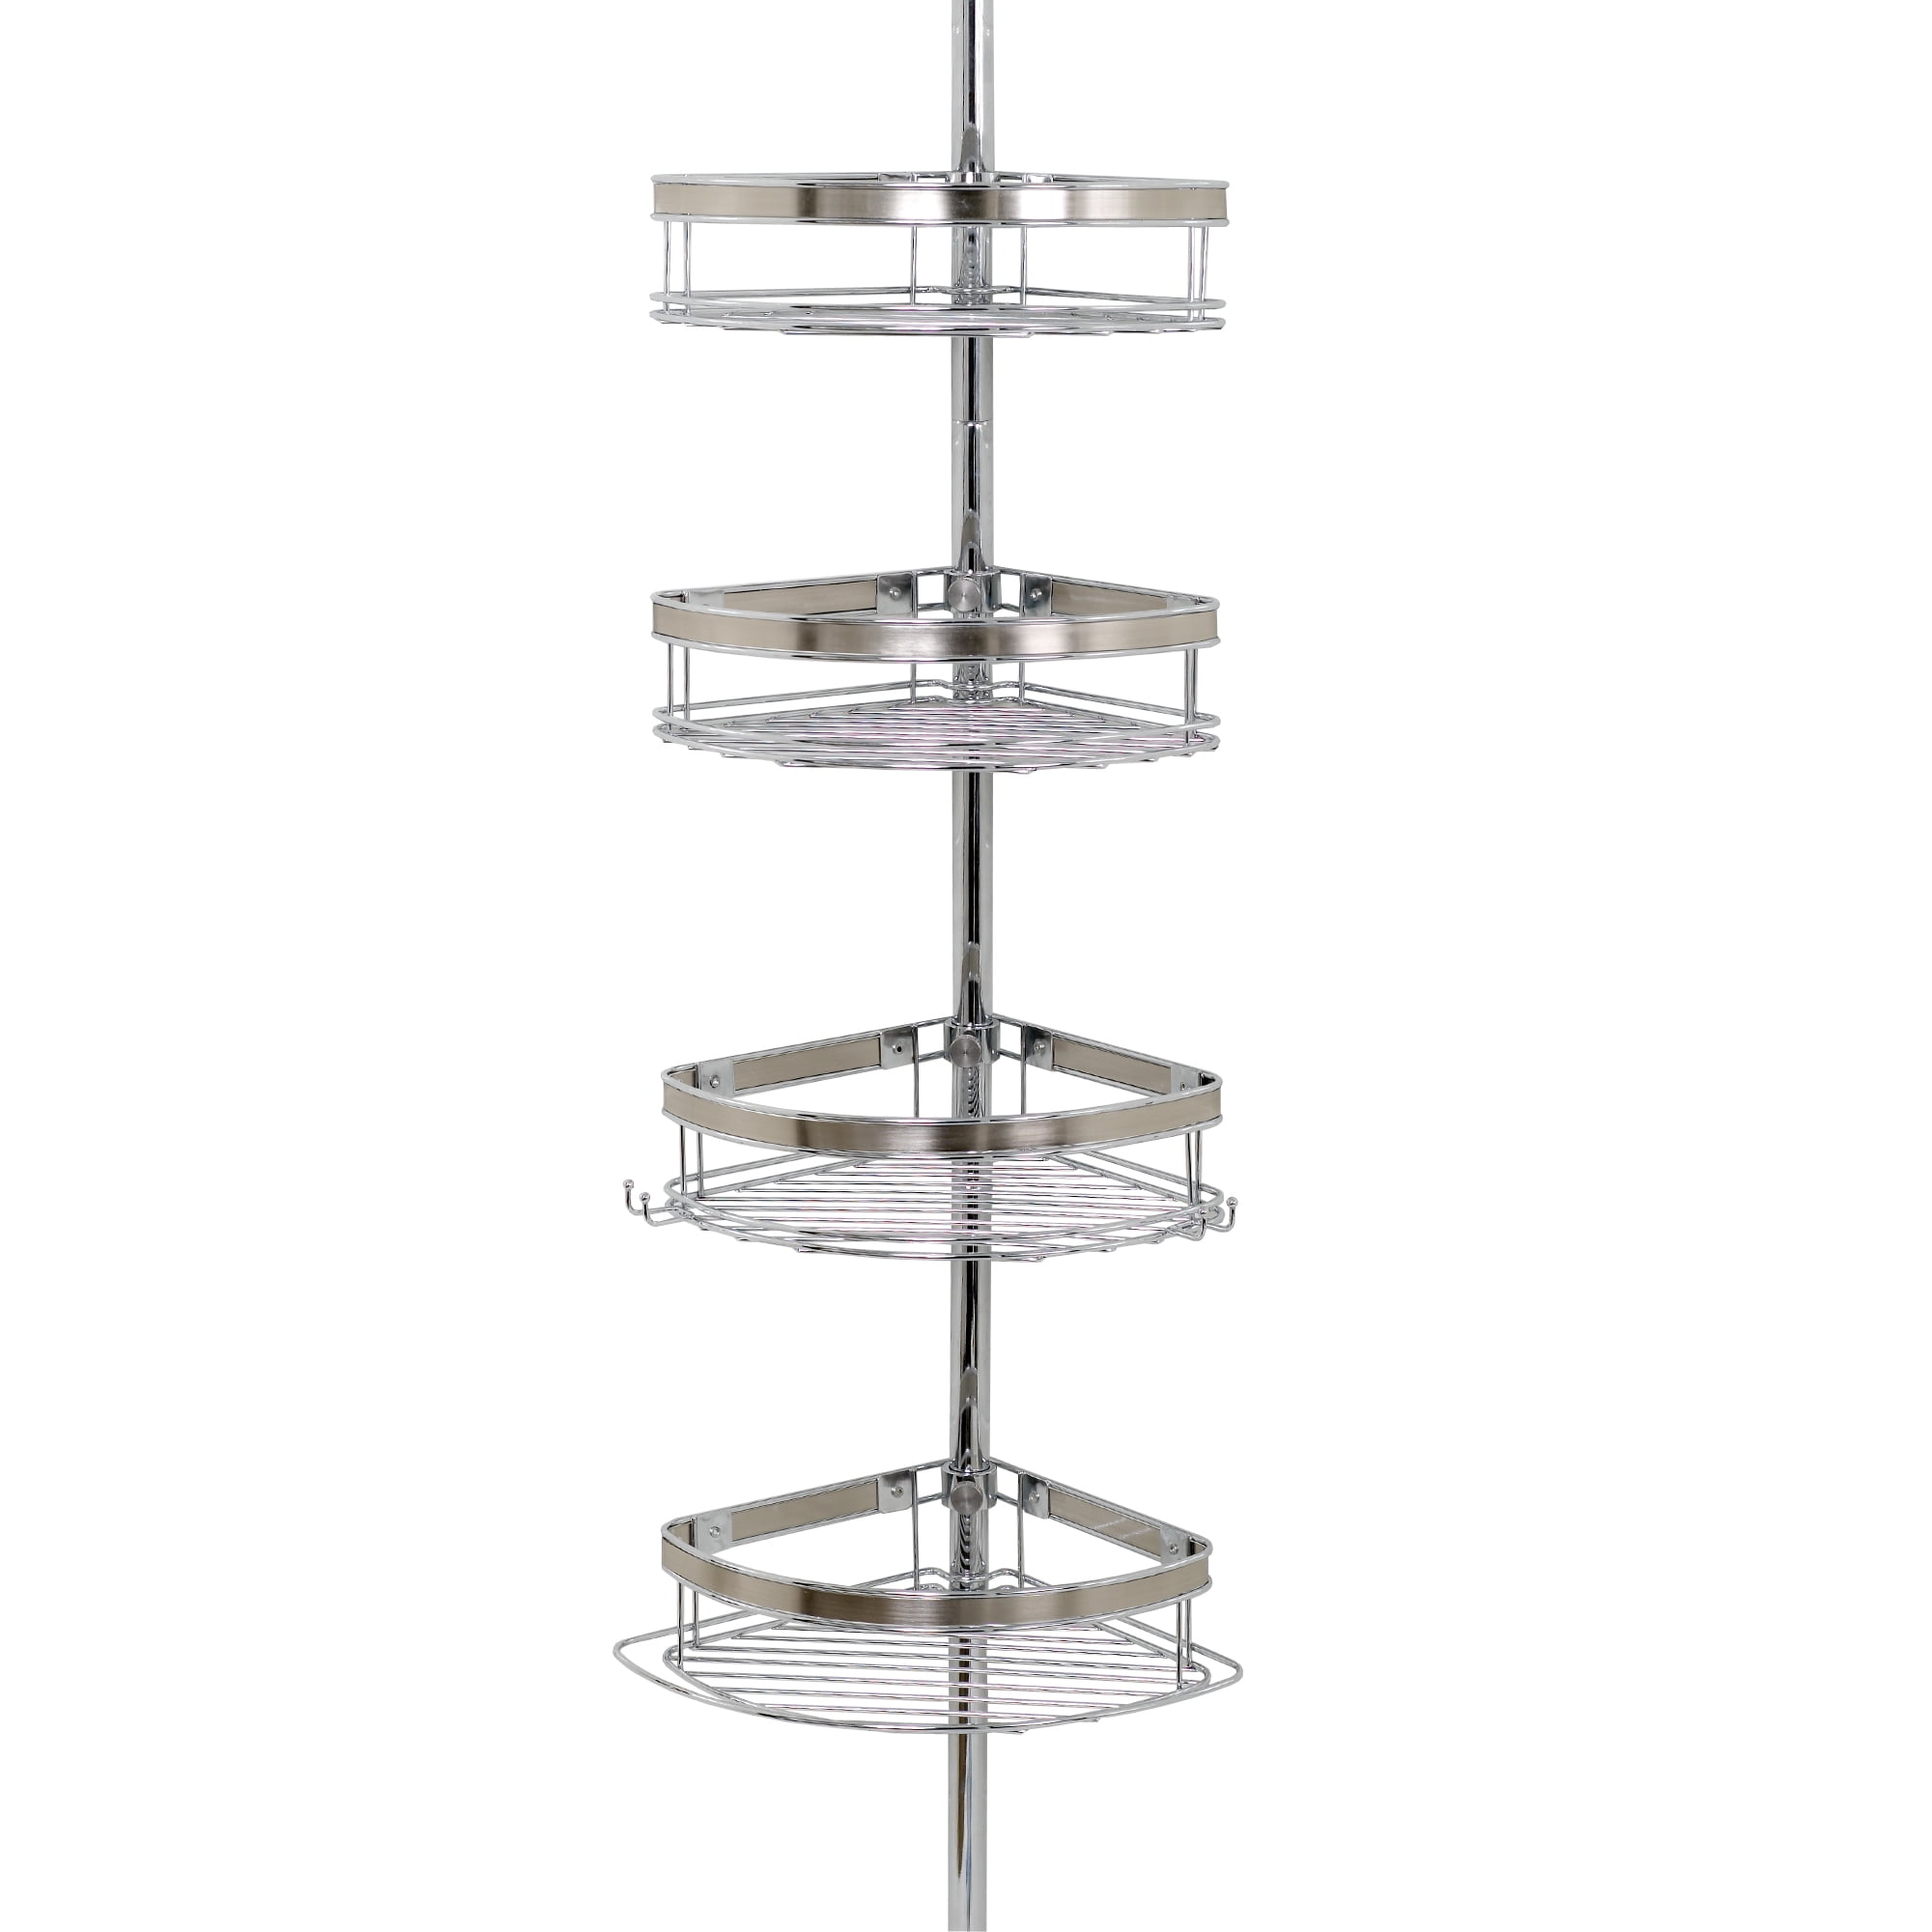  Zenna Home Tension Pole Shower Caddy, 4 Basket Shelves with  Built-In Towel Bars, Adjustable, 60 to 97 Inch, Chrome : Home & Kitchen